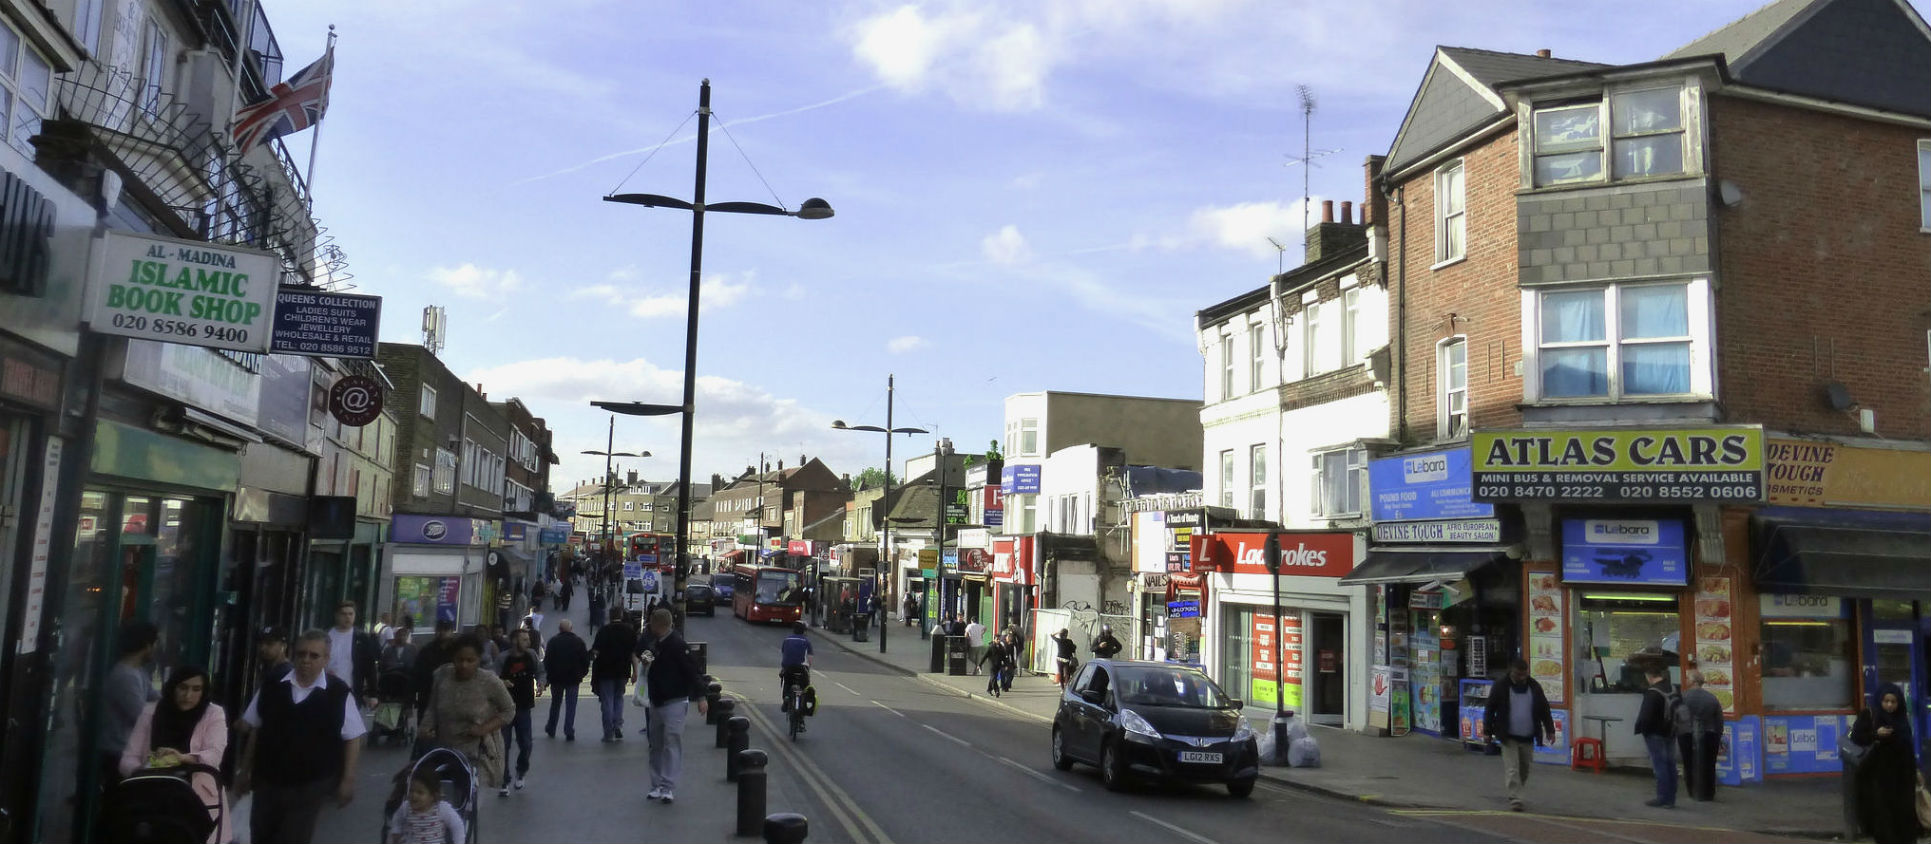 High street in Upton Park, Newham, London